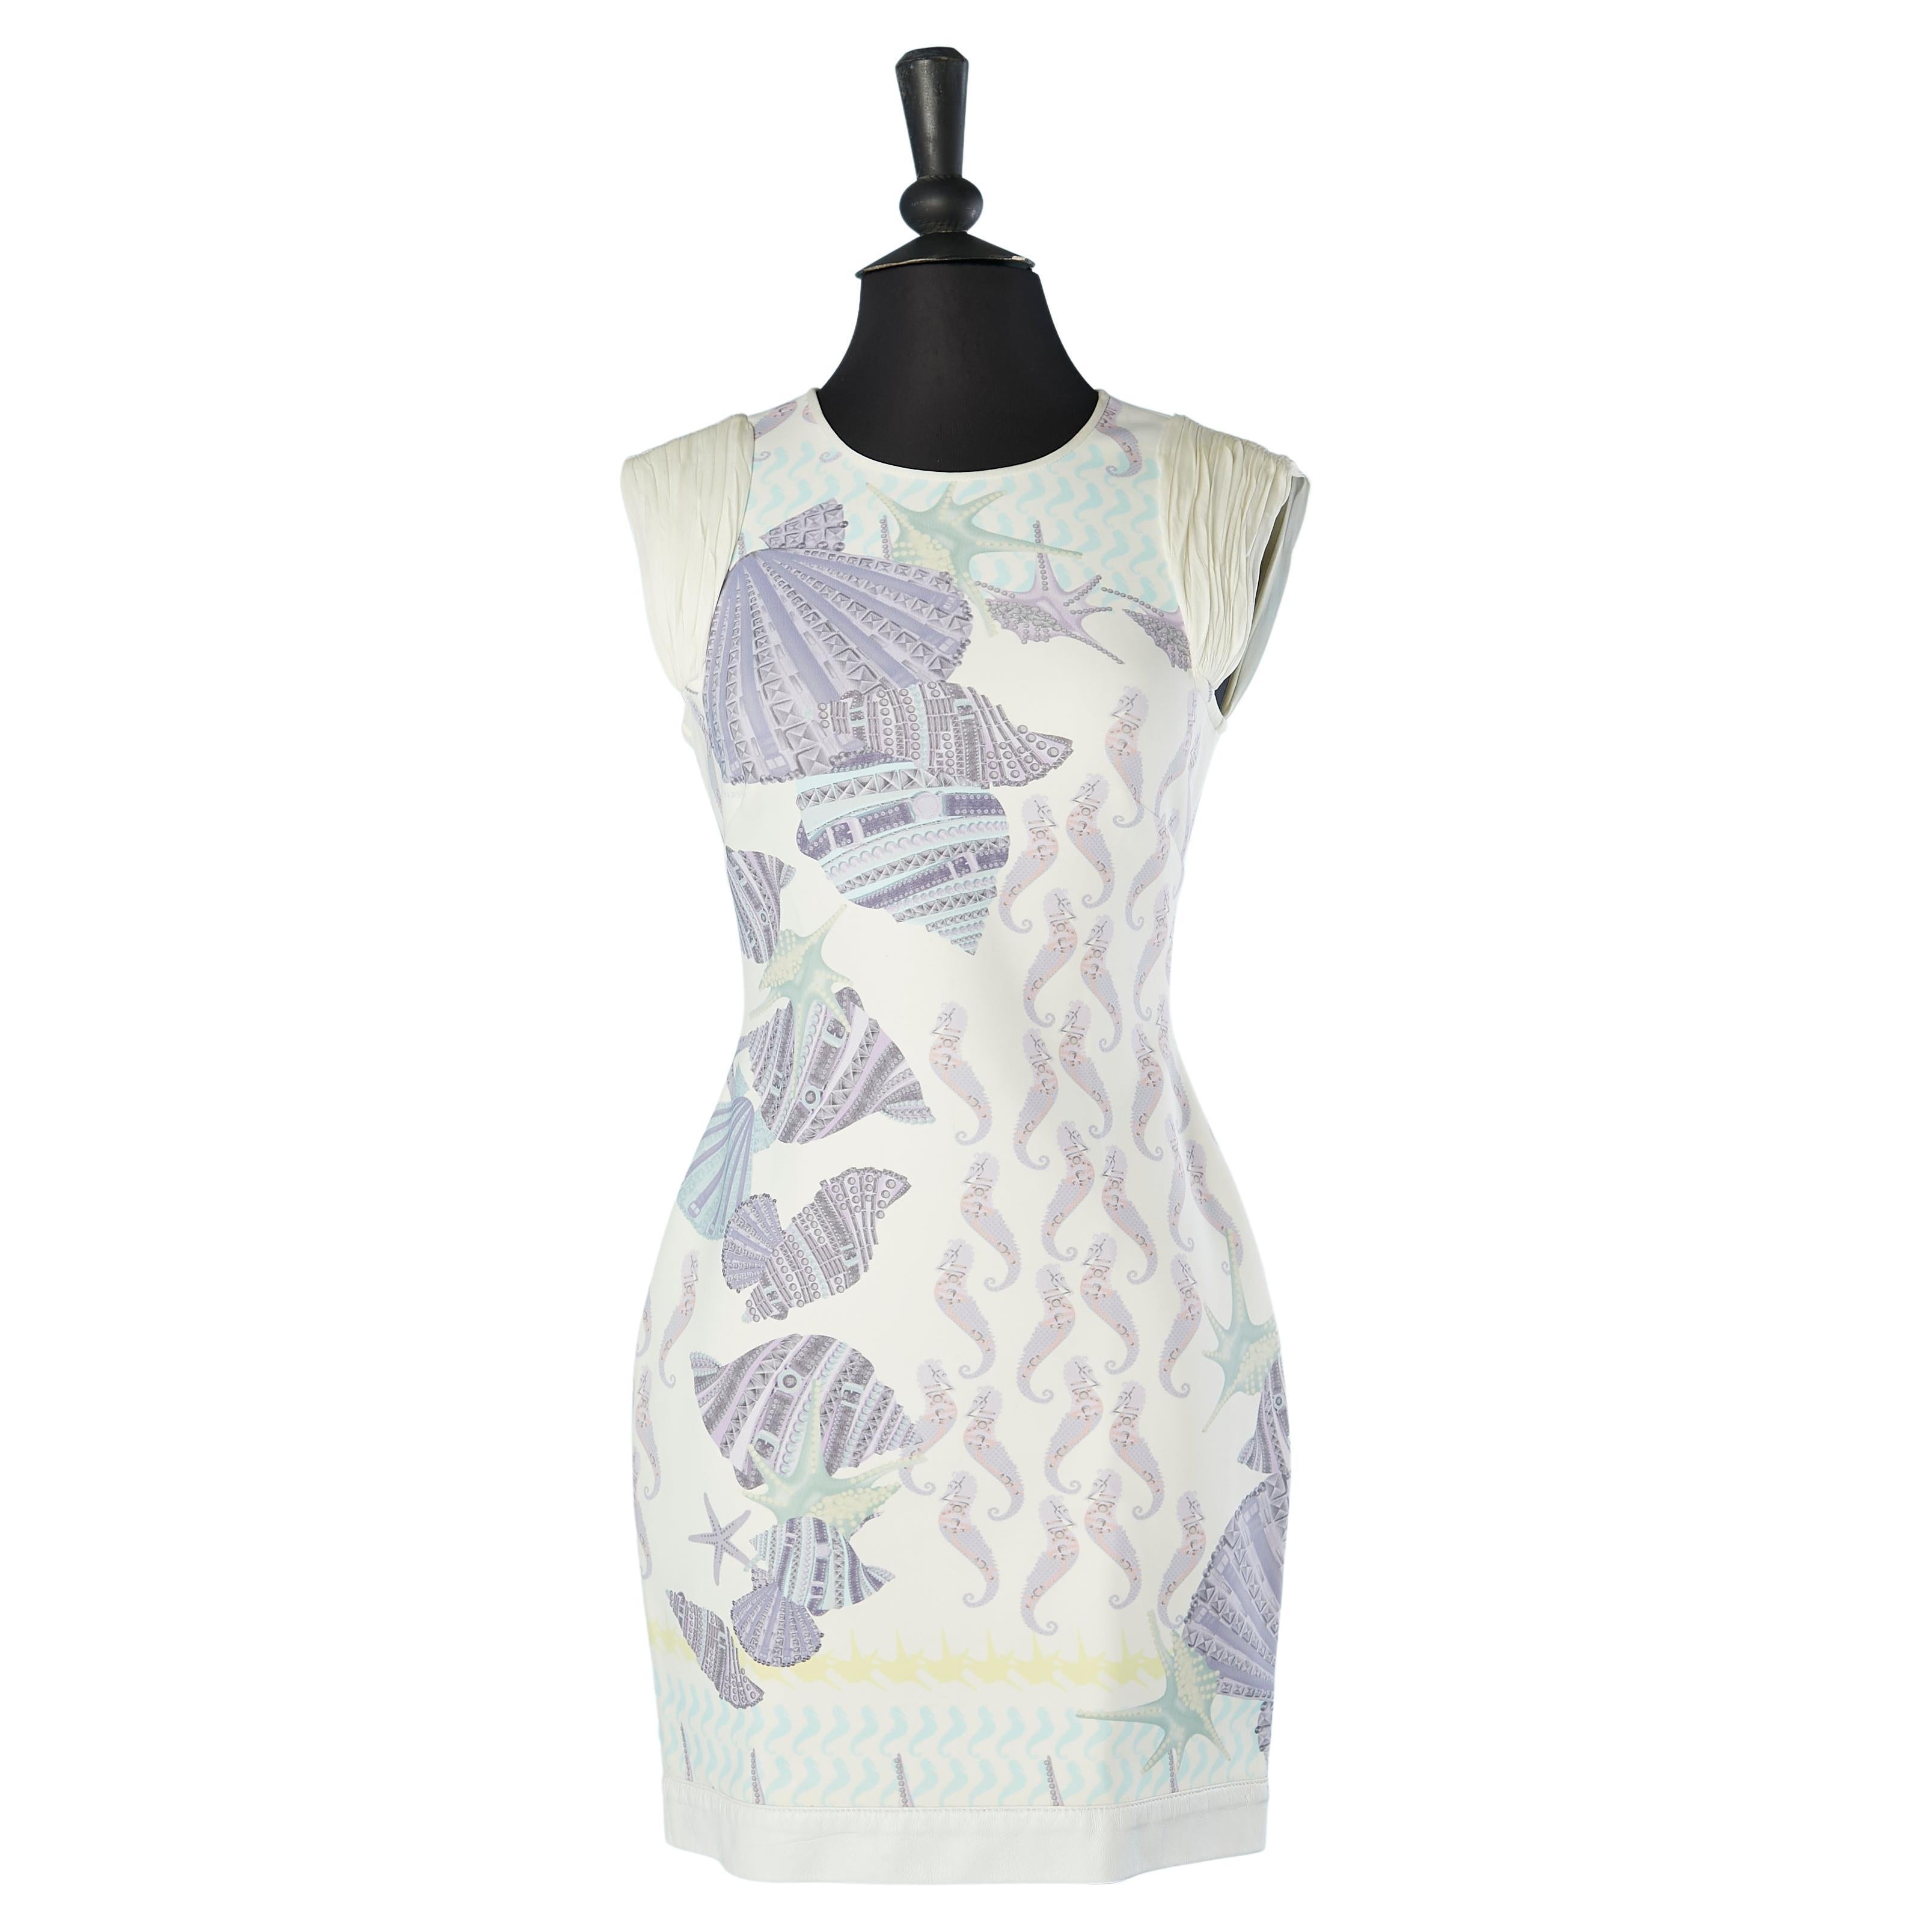 Sleeveless cocktail dress with shells and sea-horses printed Versace 